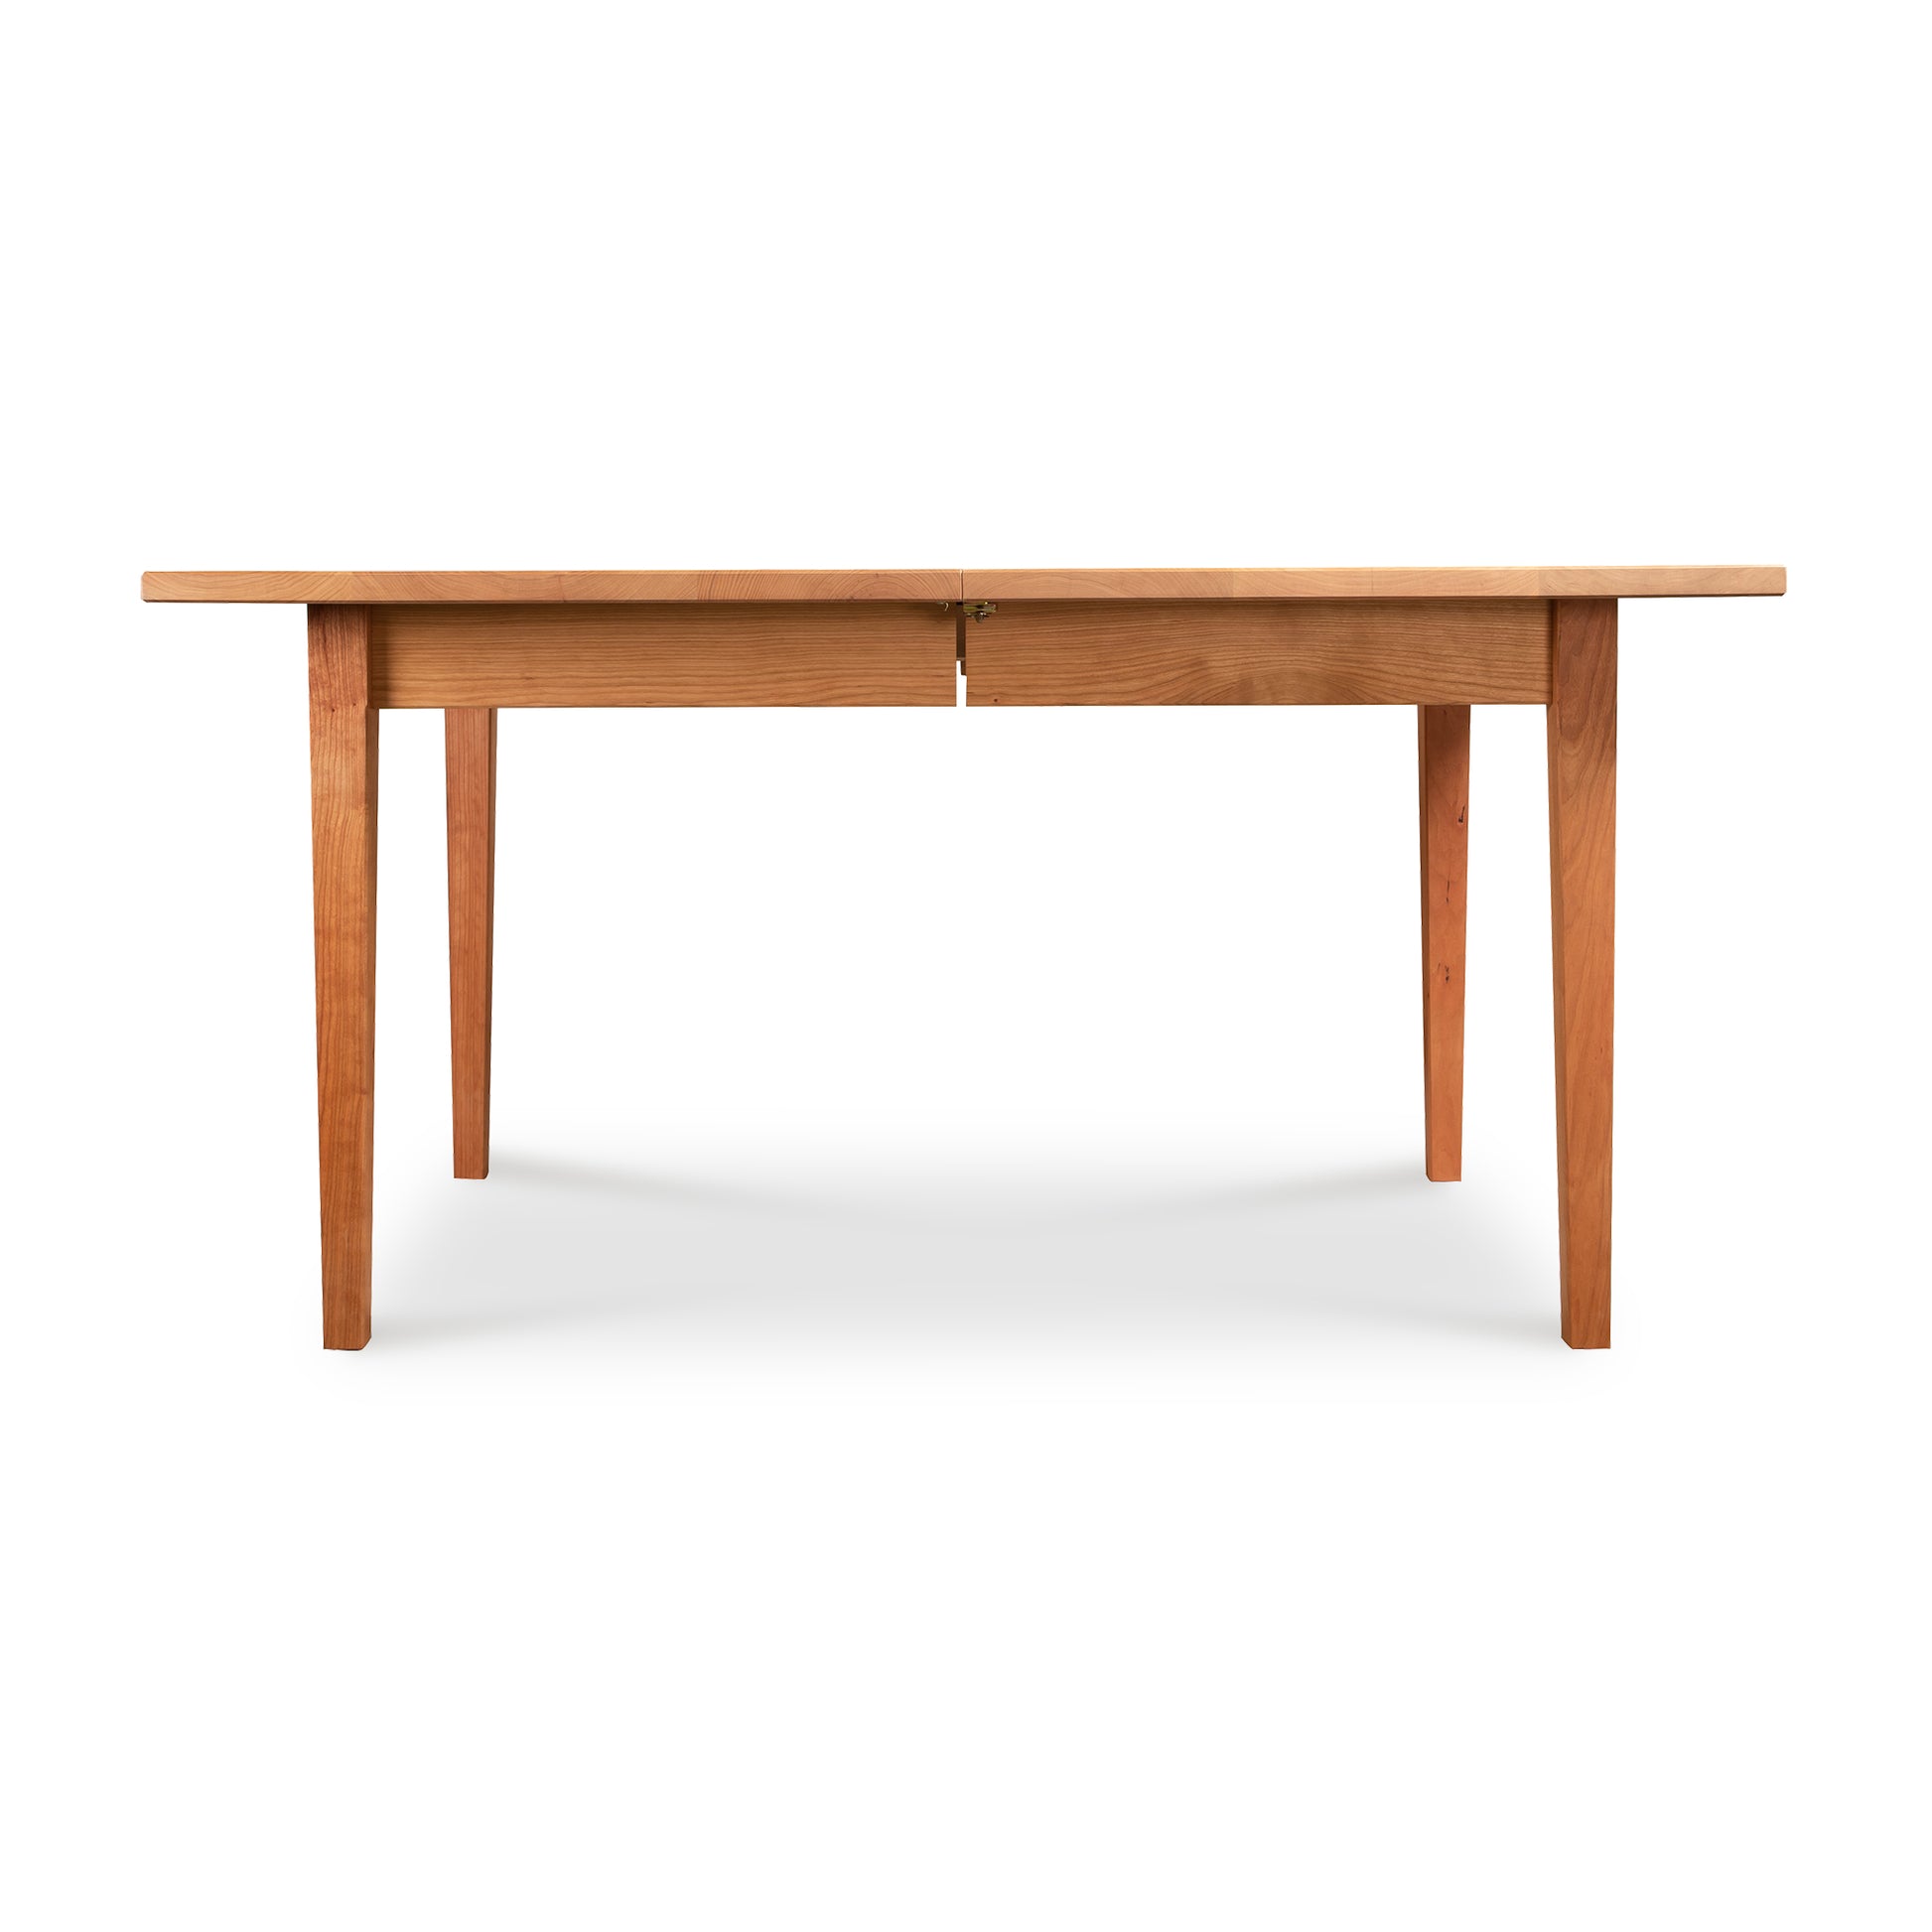 The Vermont Shaker Rectangular Extension Dining Table by Maple Corner Woodworks is a handcrafted solid wood table with two legs and two drawers.